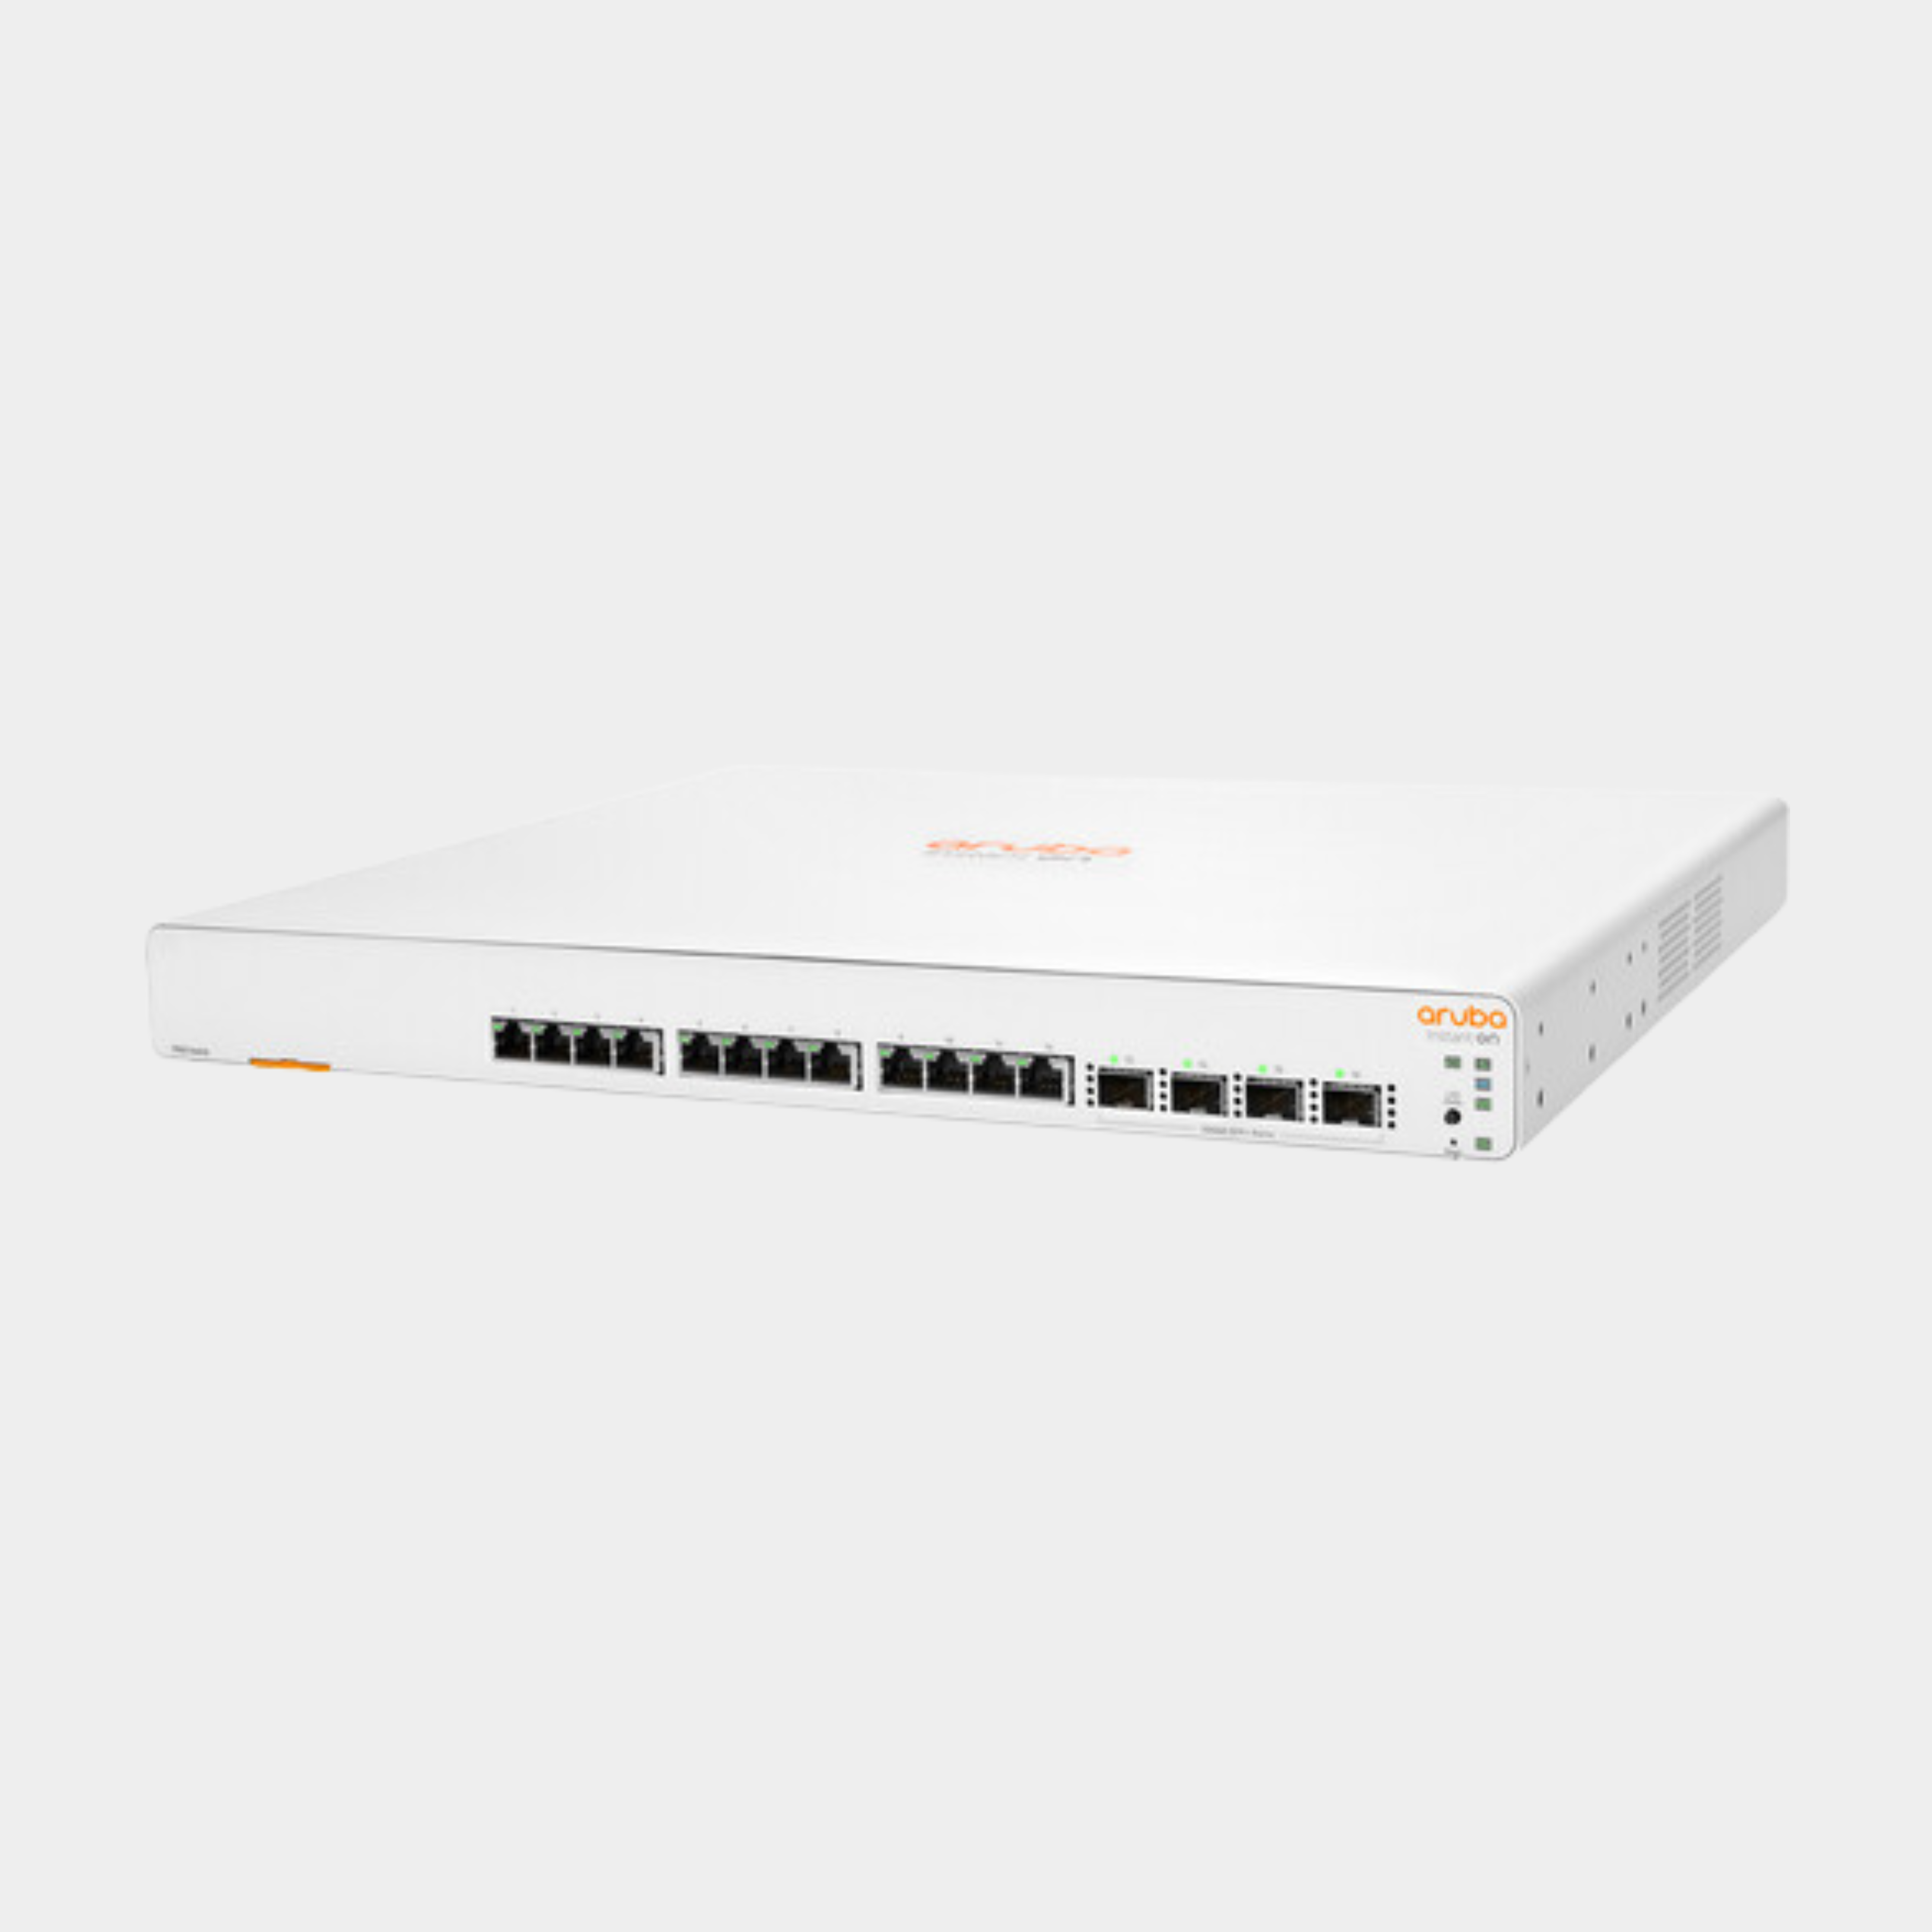 HPE Aruba Instant On 1960 12XGT 4SFP+ Switch (JL805A) | Limited Lifetime Protection